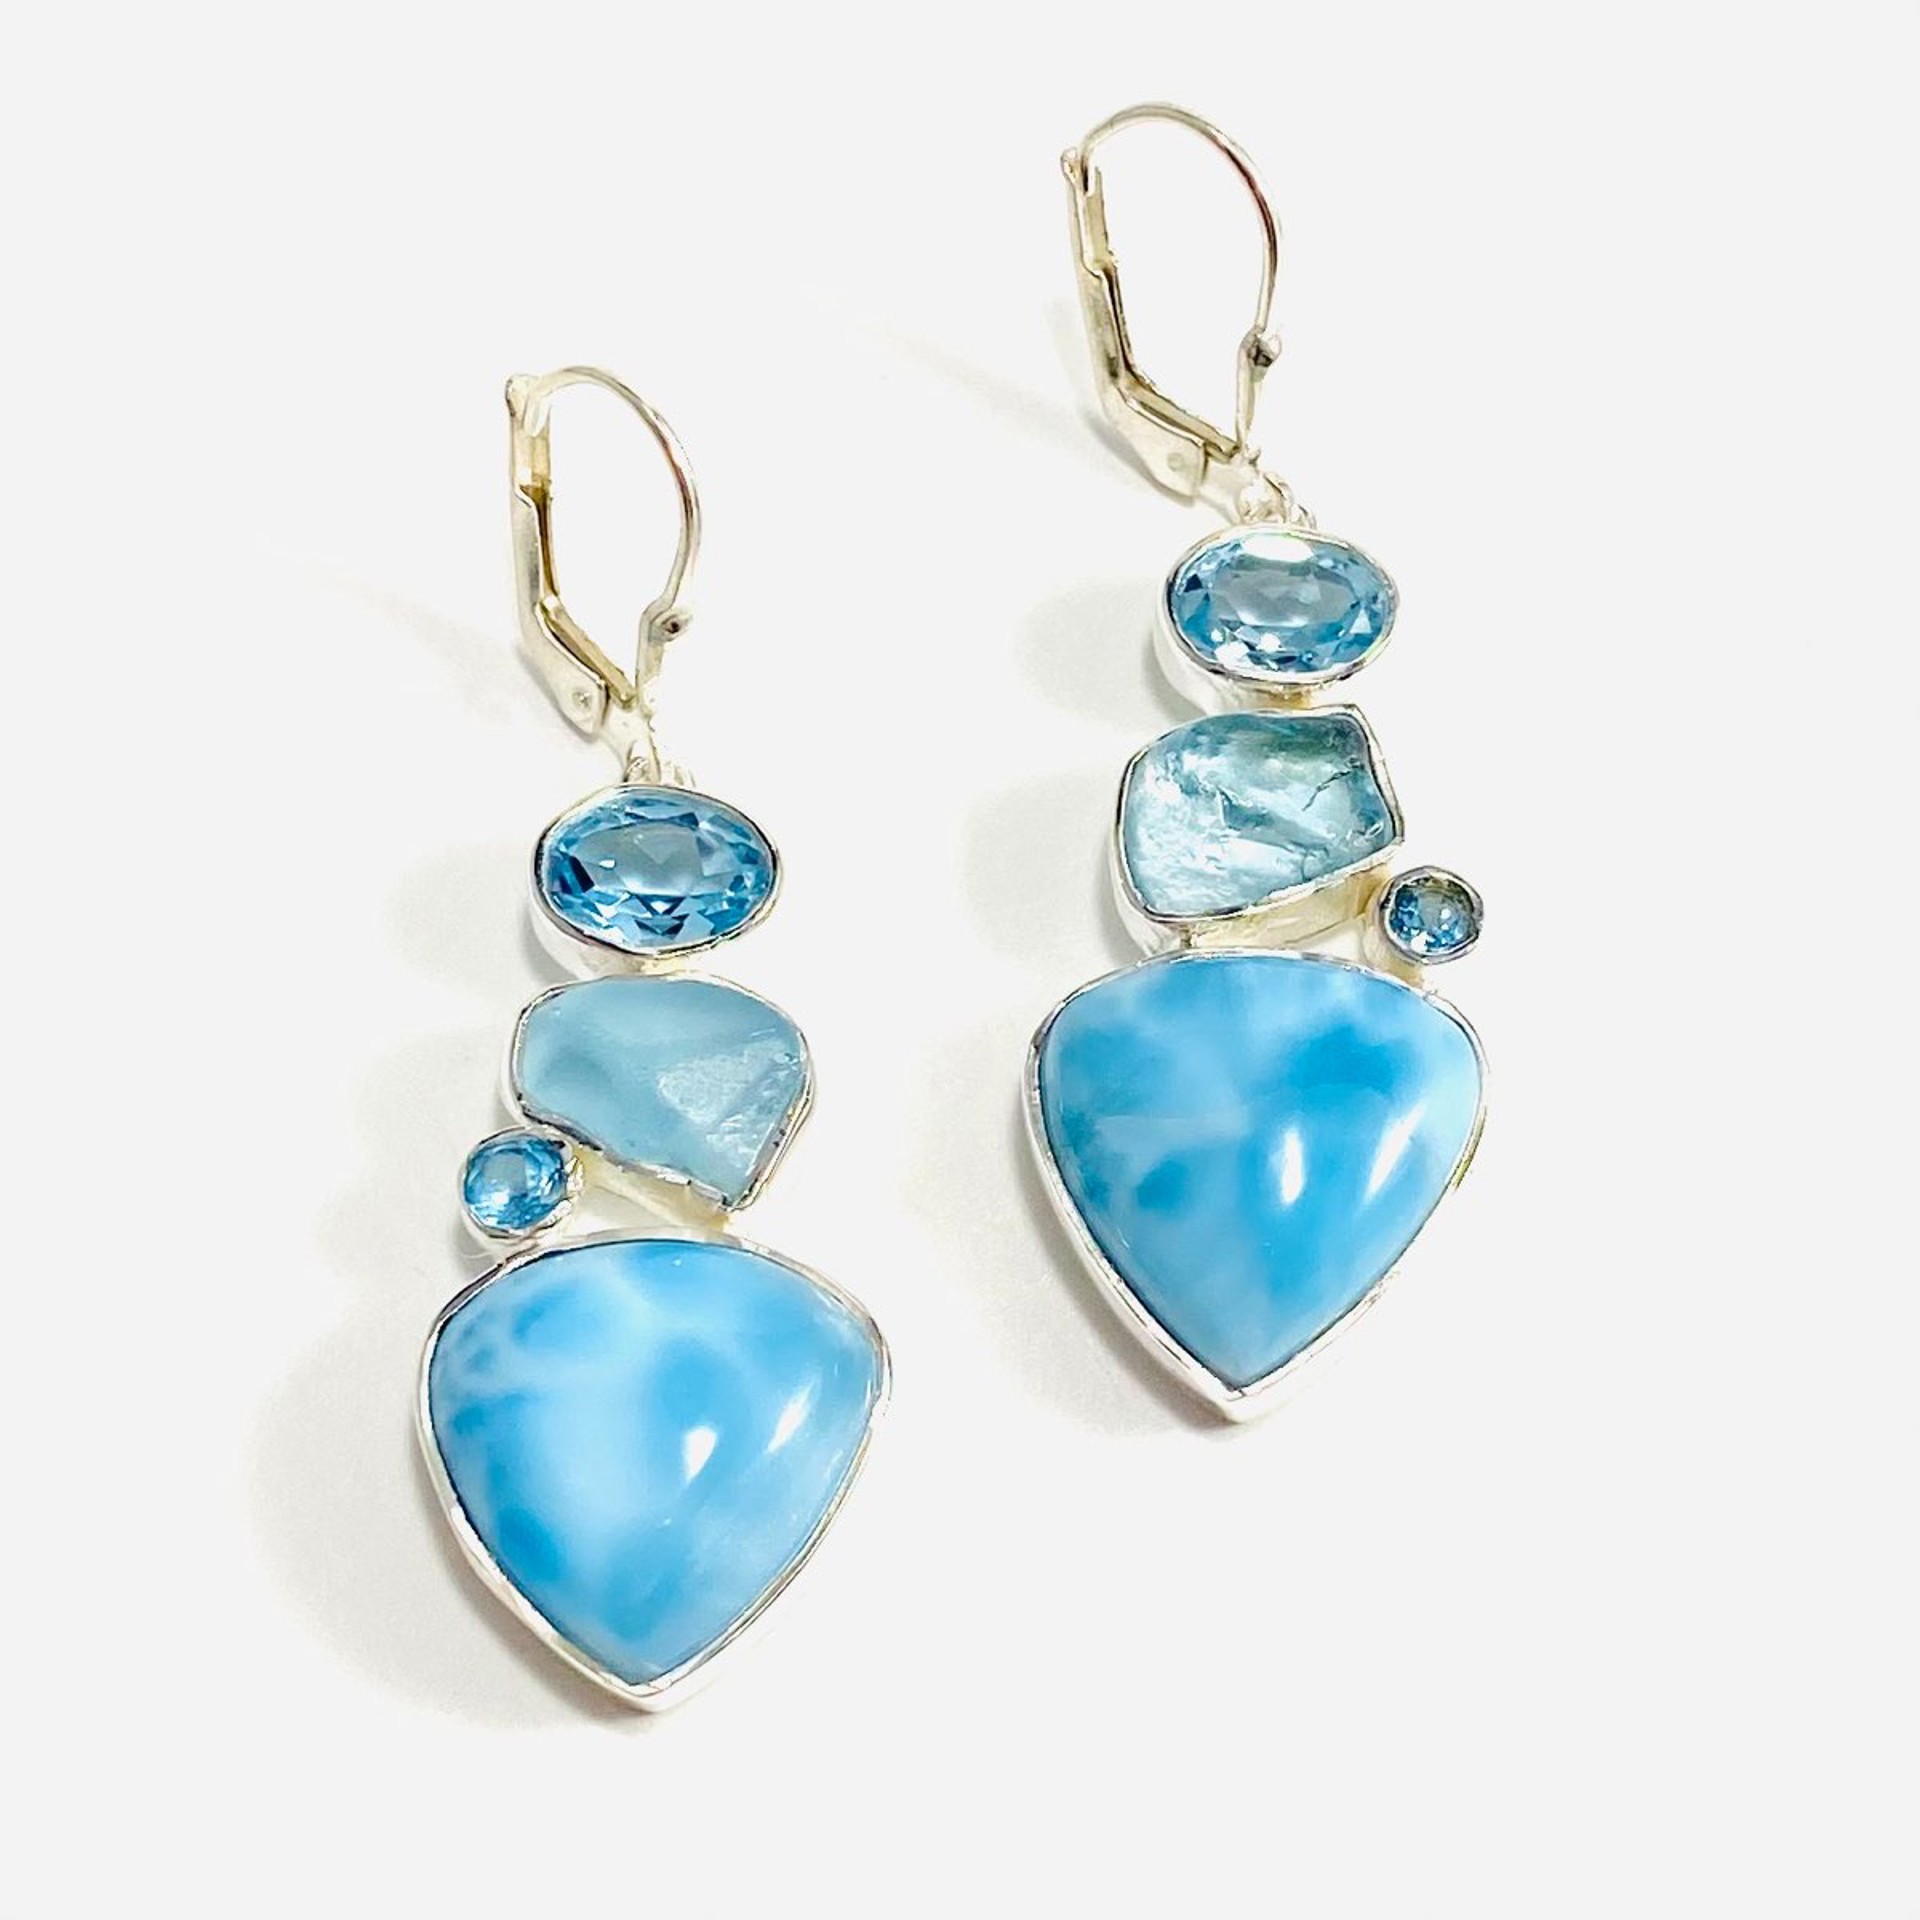 Larimar, Rough and Faceted Blue Topaz Earrings by Monica Mehta